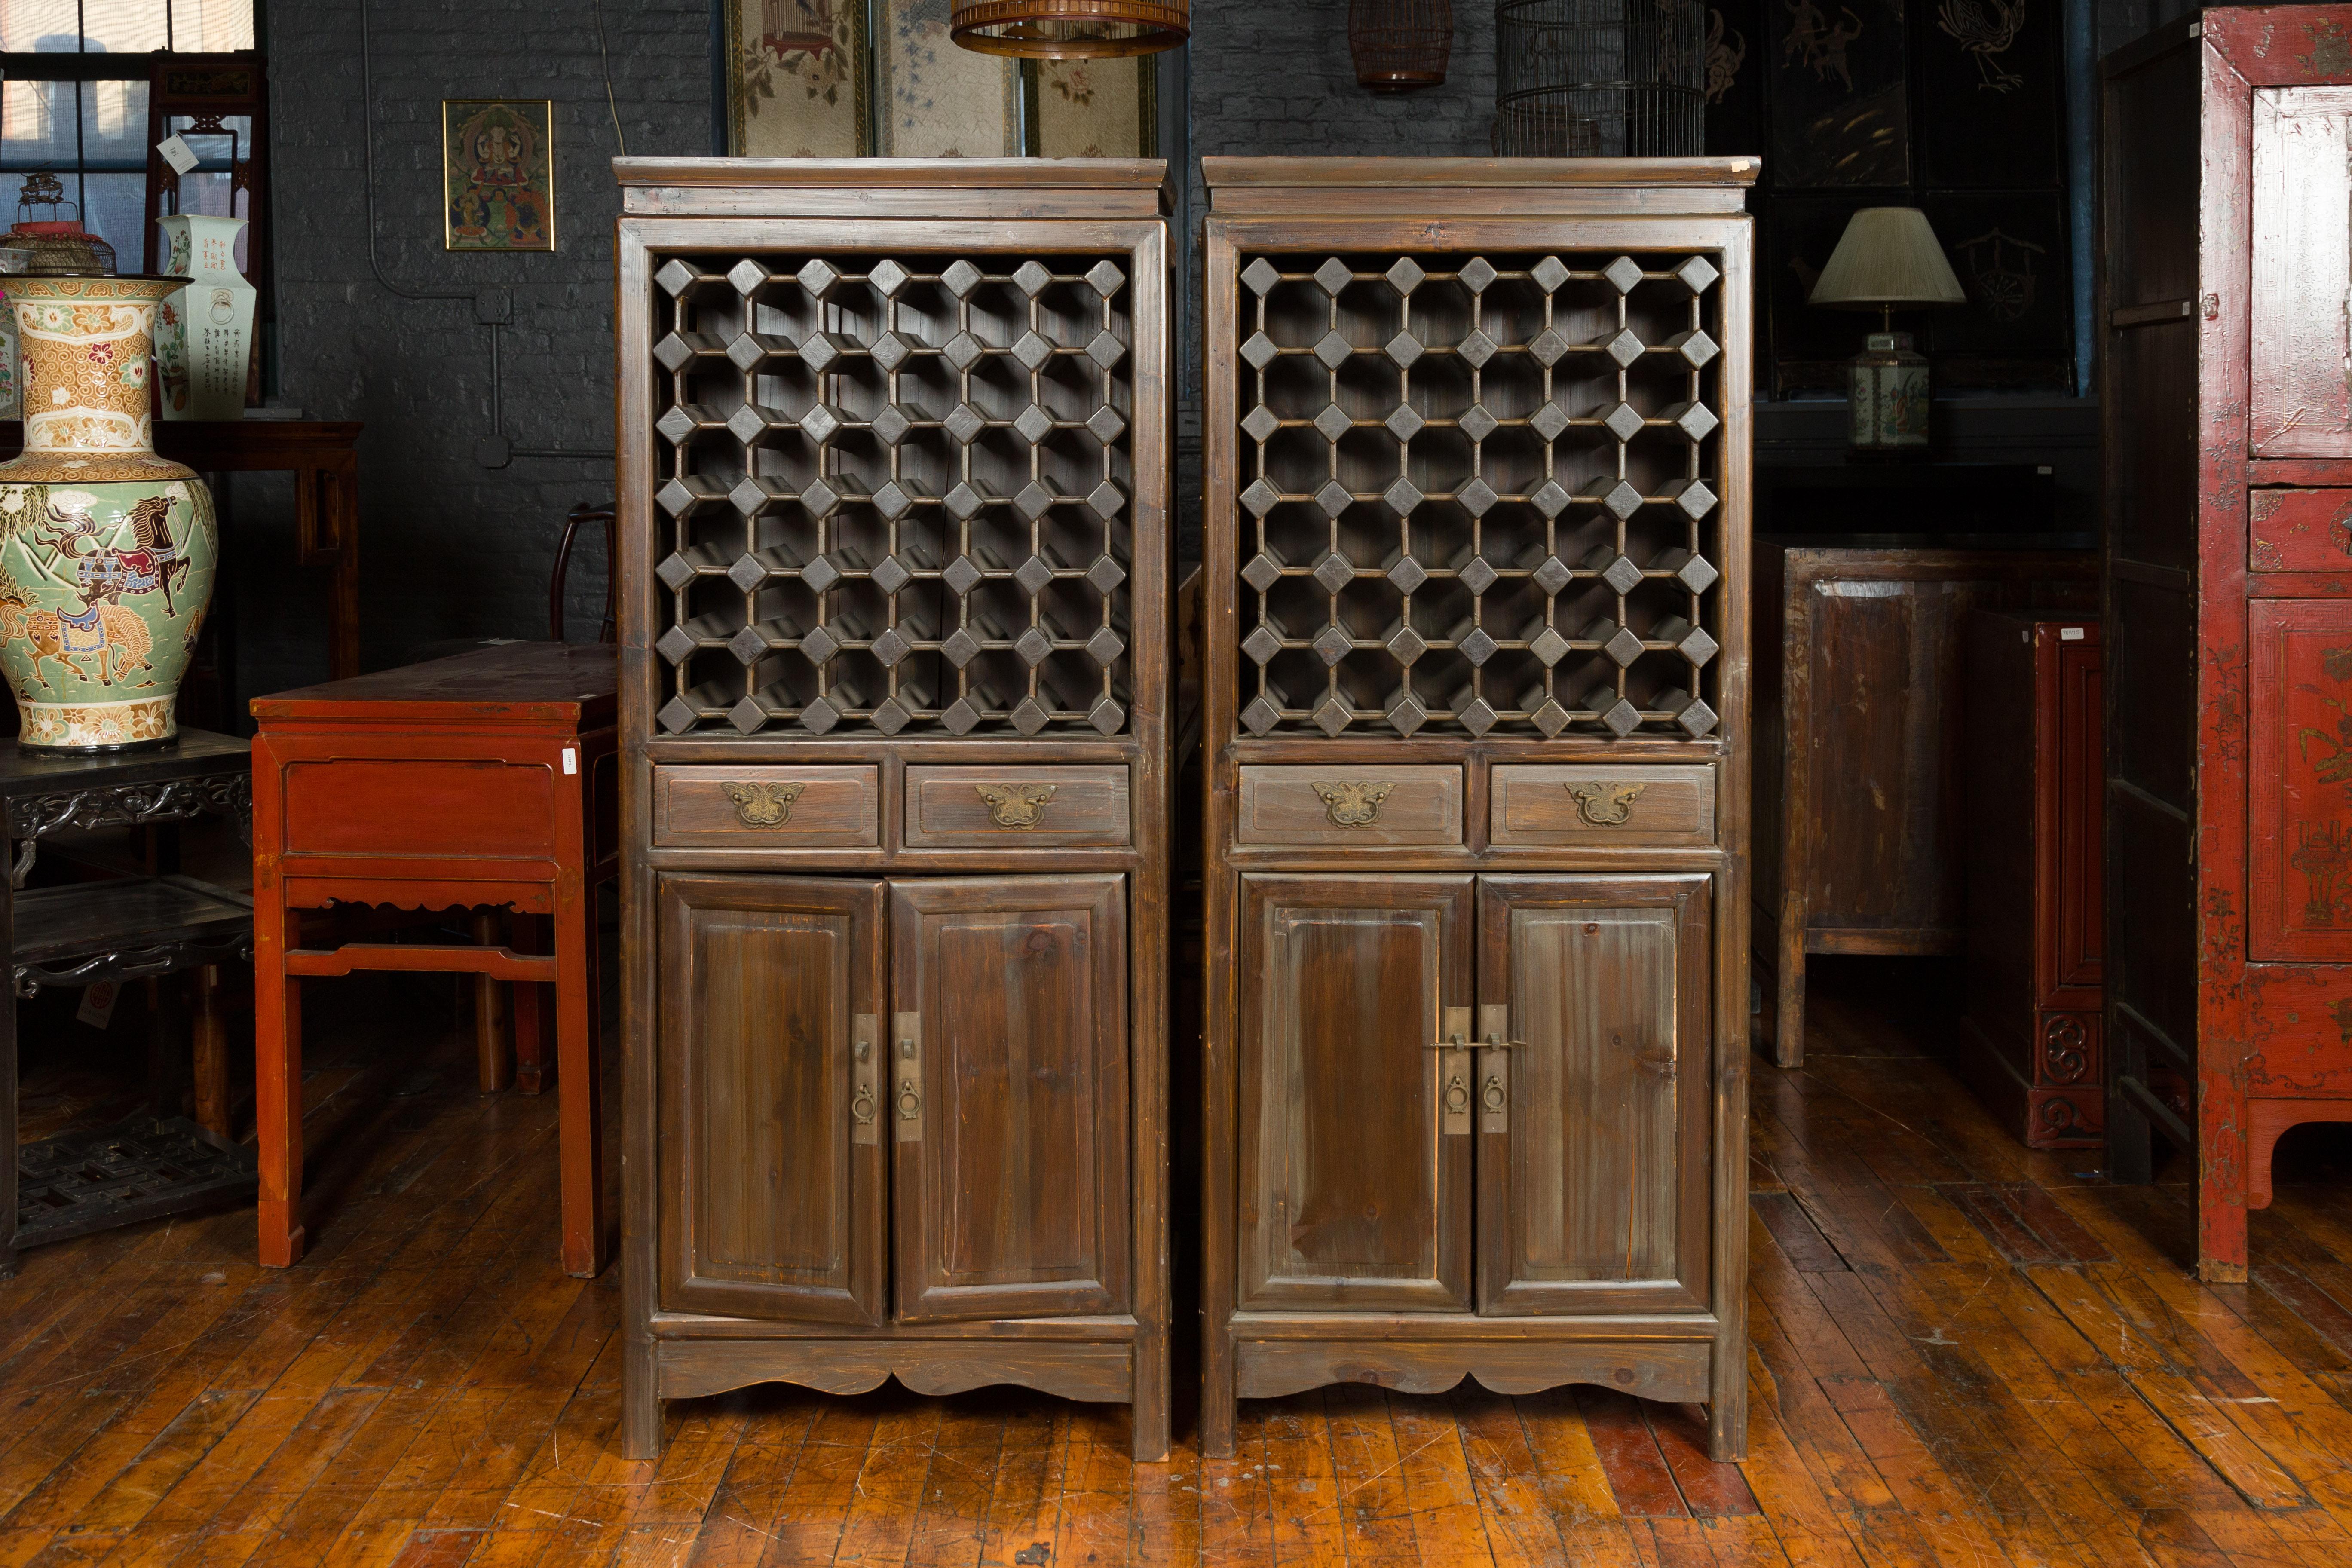 A pair of Chinese vintage cabinets from the mid-20th century, with partitioned removable scroll shelves, drawers and doors. Created in China during the midcentury period, this pair of tall cabinets attracts our attention with its interesting shelves